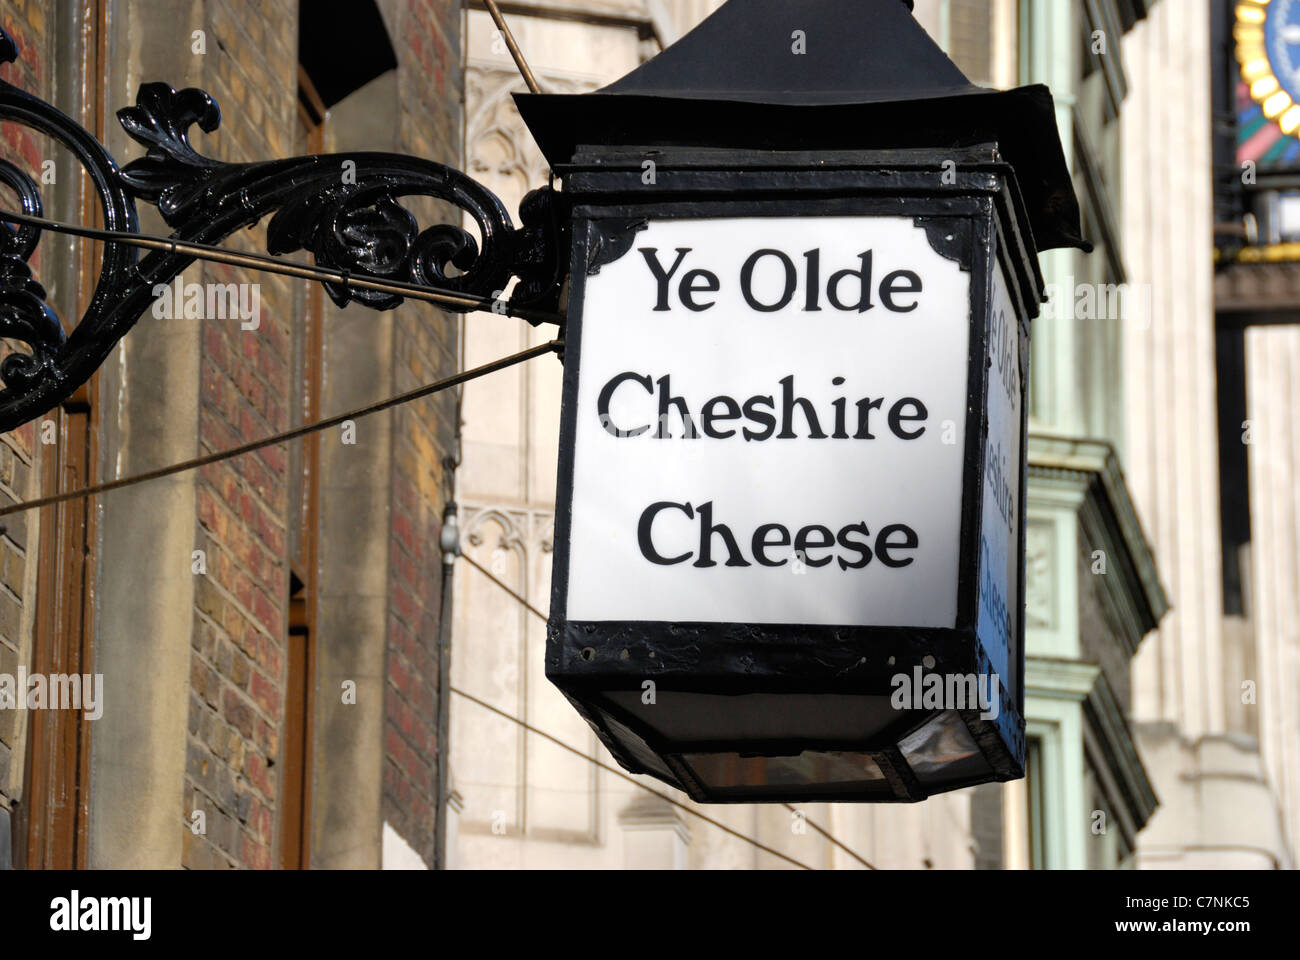 Le Ye Olde Cheshire Cheese pub dans Fleet Street, Londres, Angleterre Banque D'Images